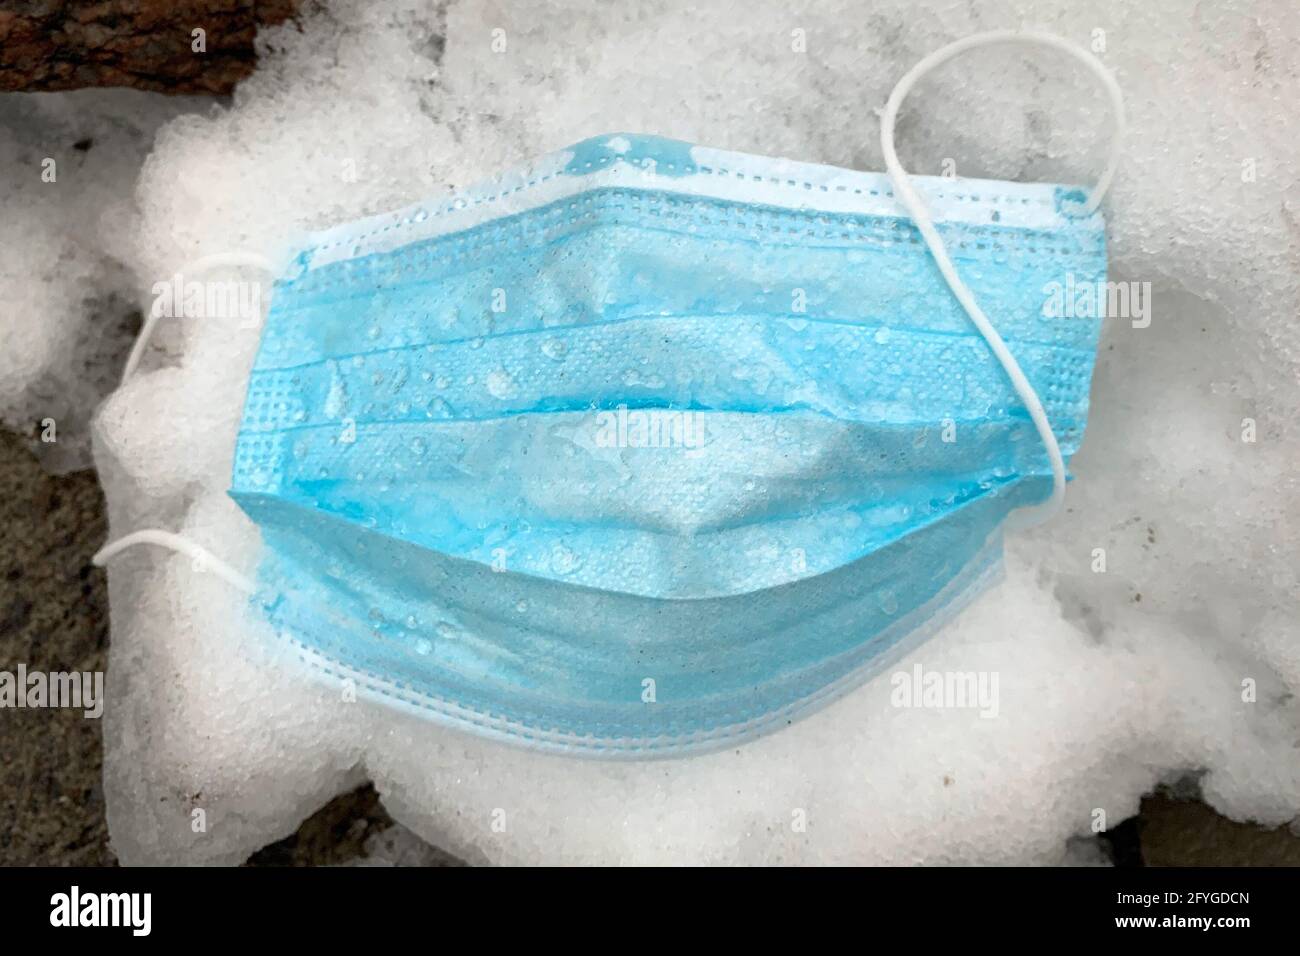 A discarded disposable mask is pictured on snow in Kingston, Ontario on Monday, January 11, 2021, as the COVID-19 pandemic continues across Canada and Stock Photo